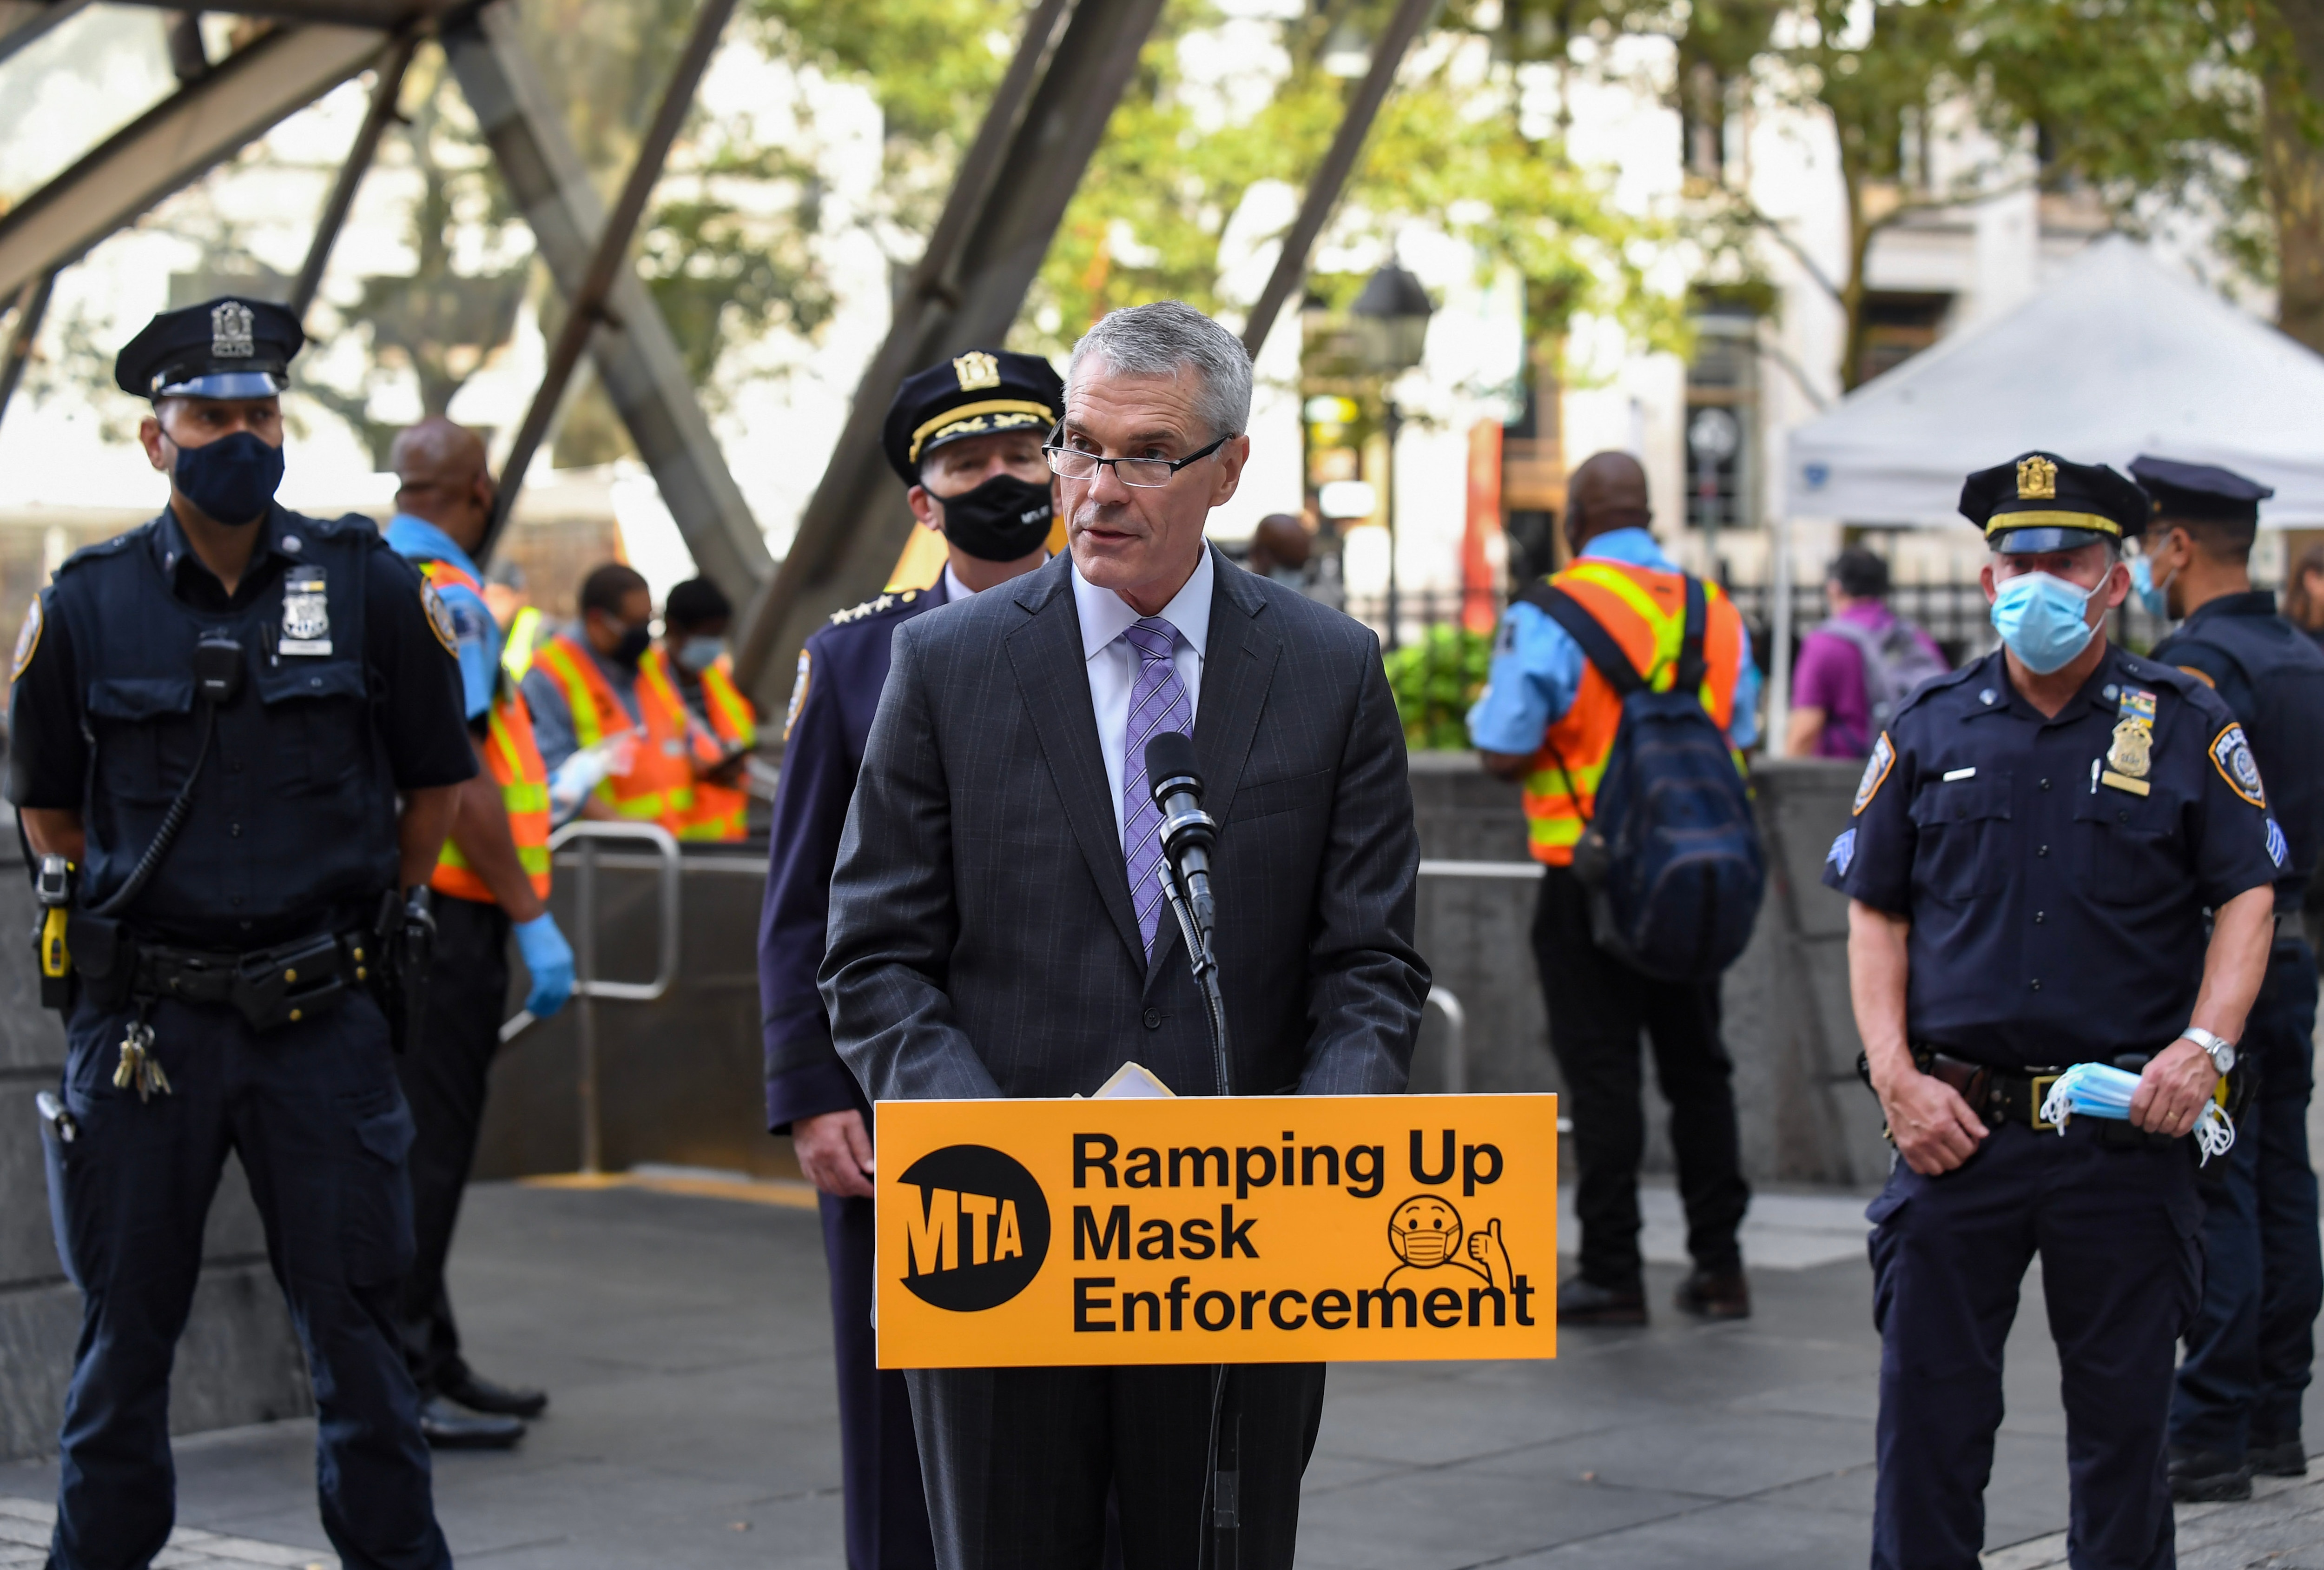 MTA Announces Increased Mask Enforcement Throughout the System